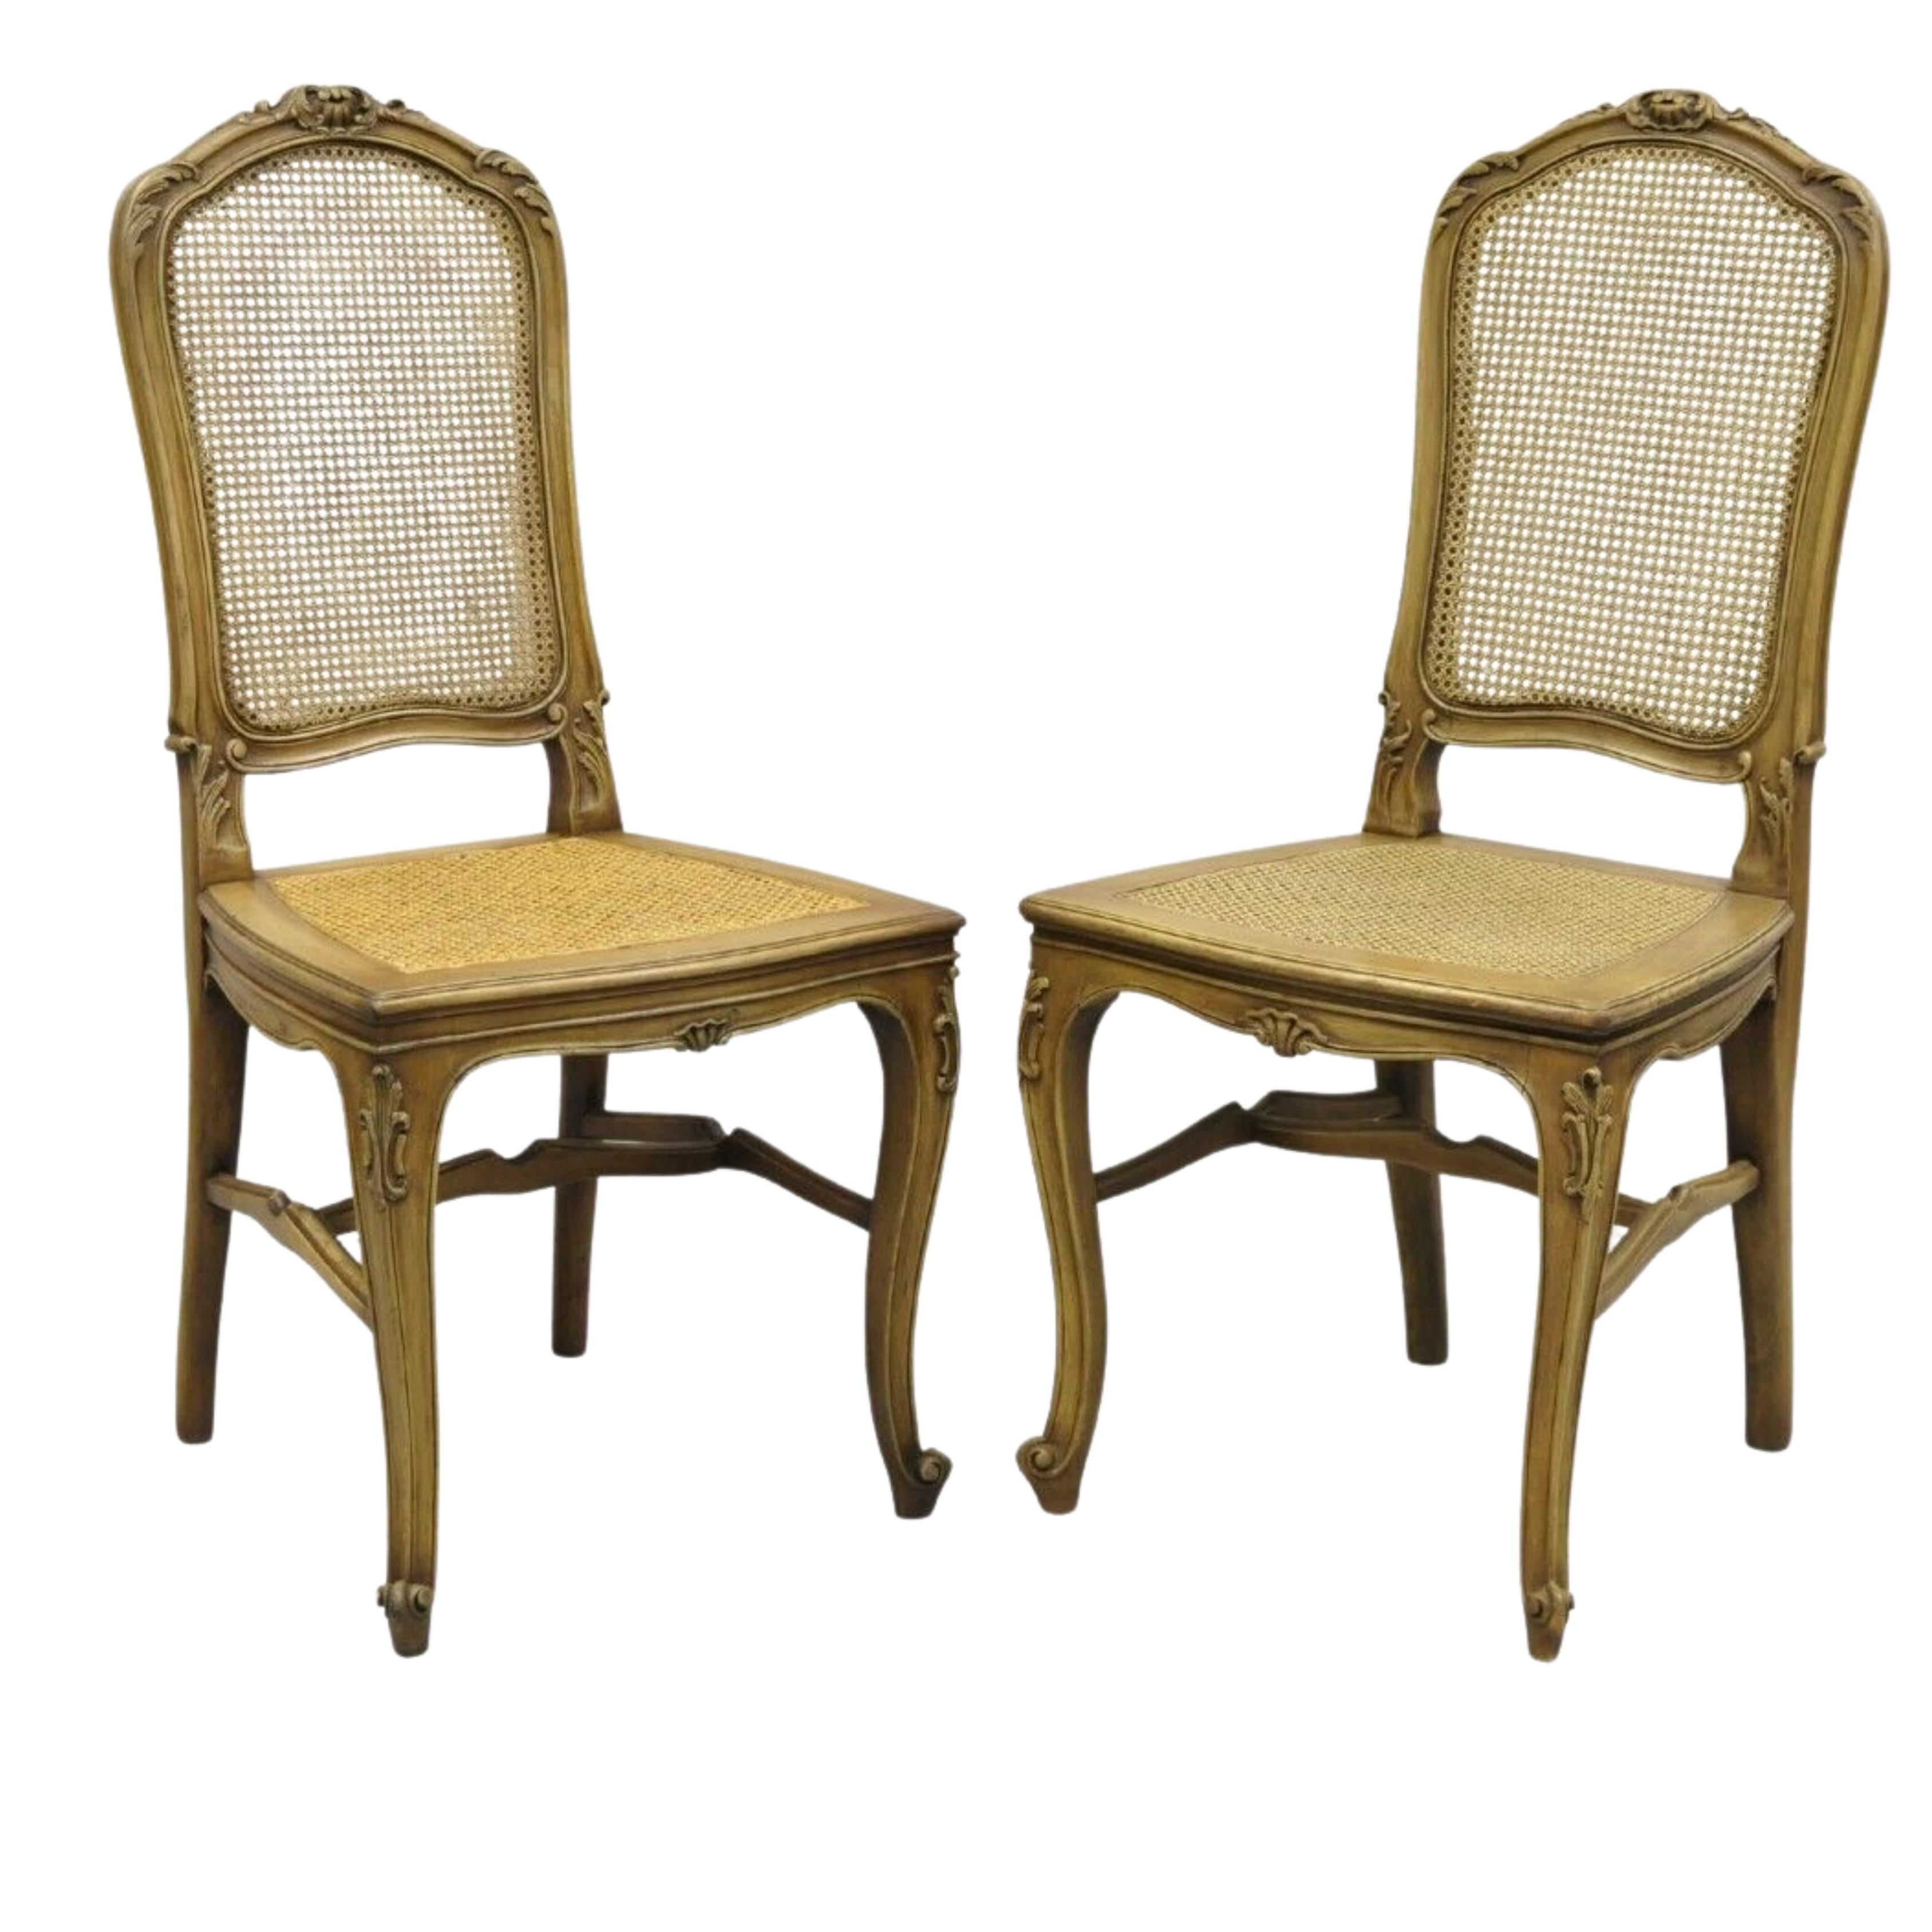 Antique French Provincial Louis XV Style Carved Walnut Cane Dining Chair - Pair For Sale